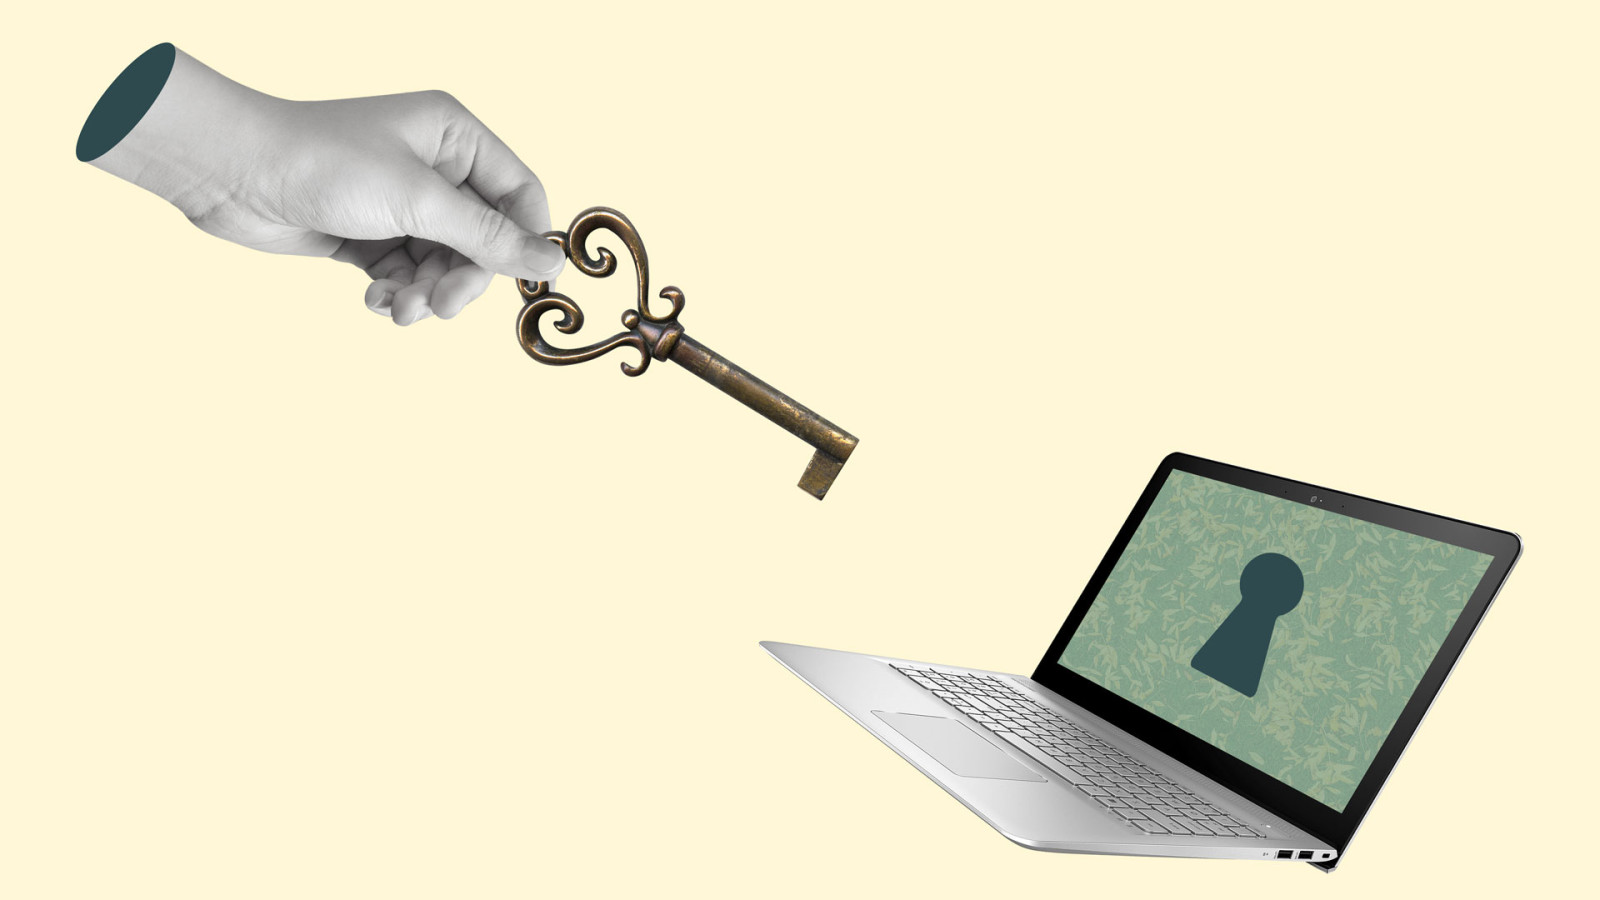 Creative collage of hand with a key and laptop.